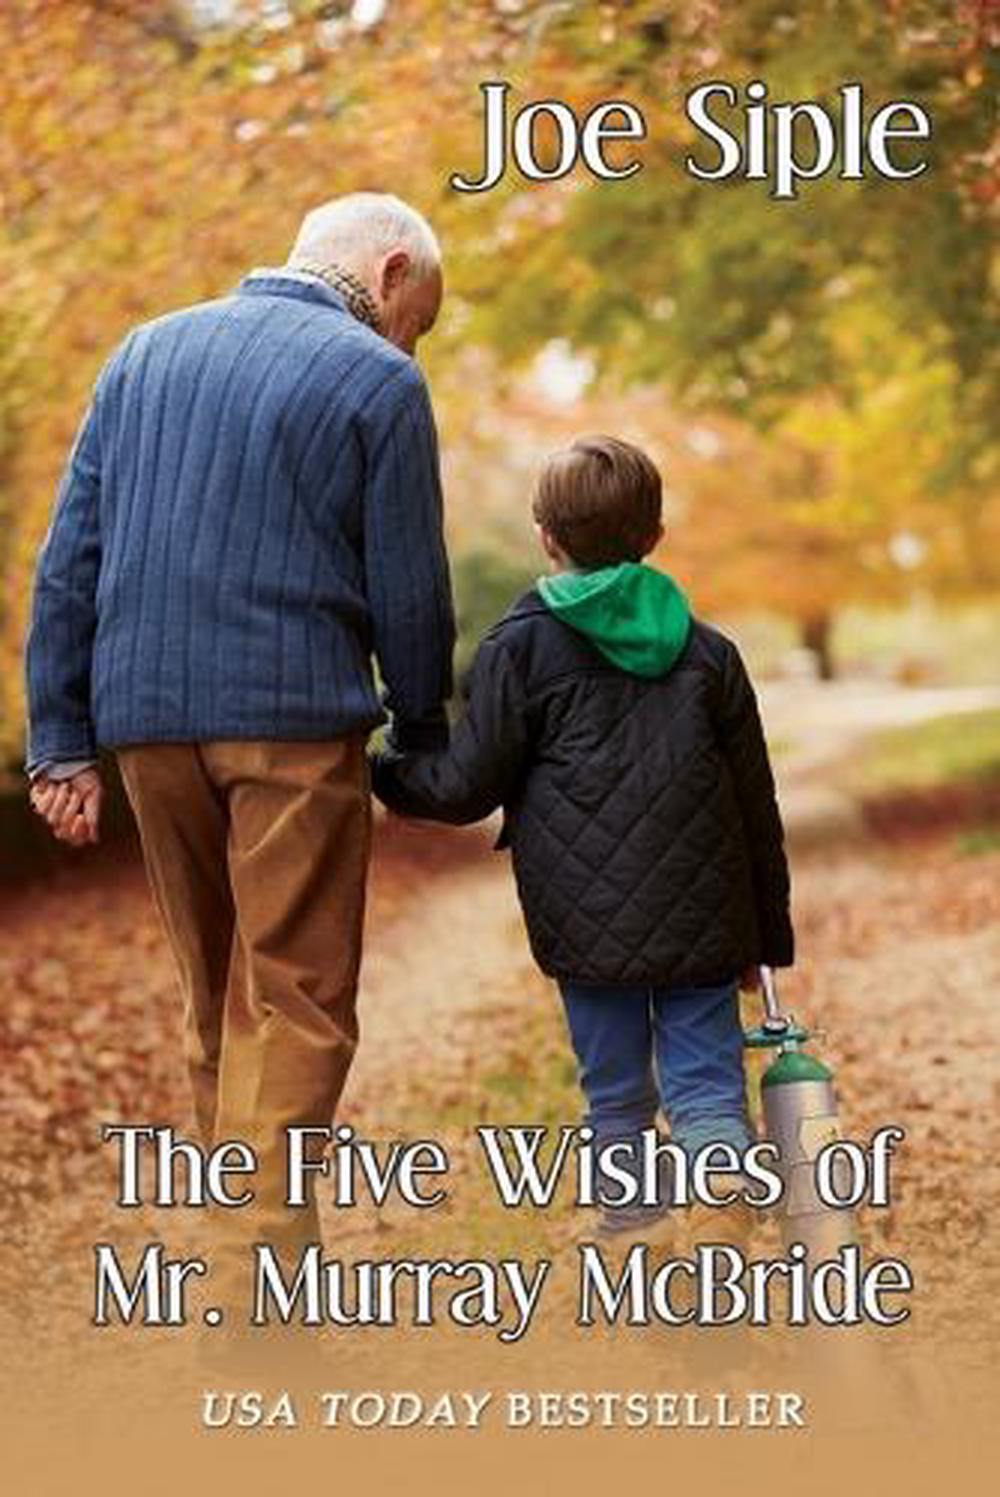 the-five-wishes-of-mr-murray-mcbride-by-joe-siple-paperback-book-free